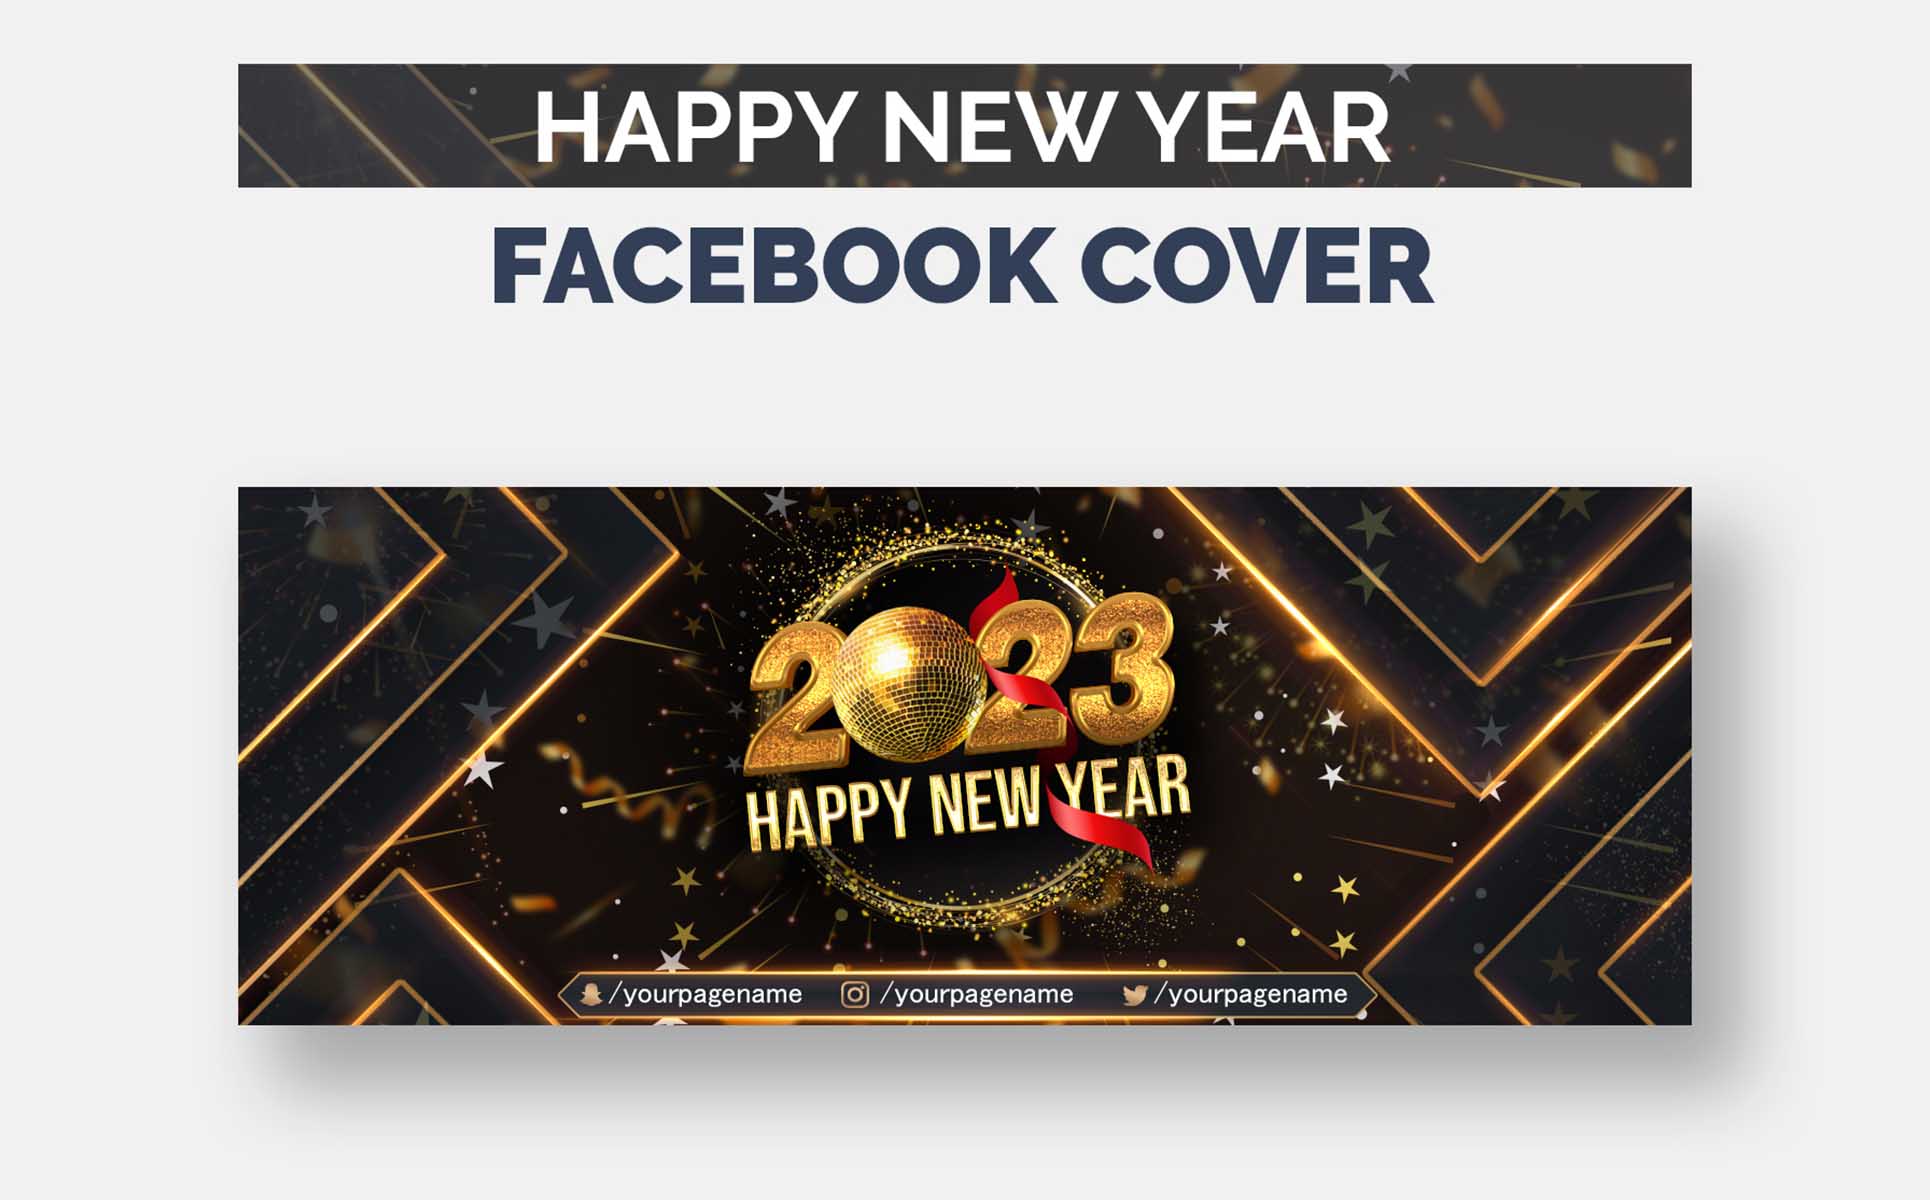 Happy New Year Facebook cover preview image.